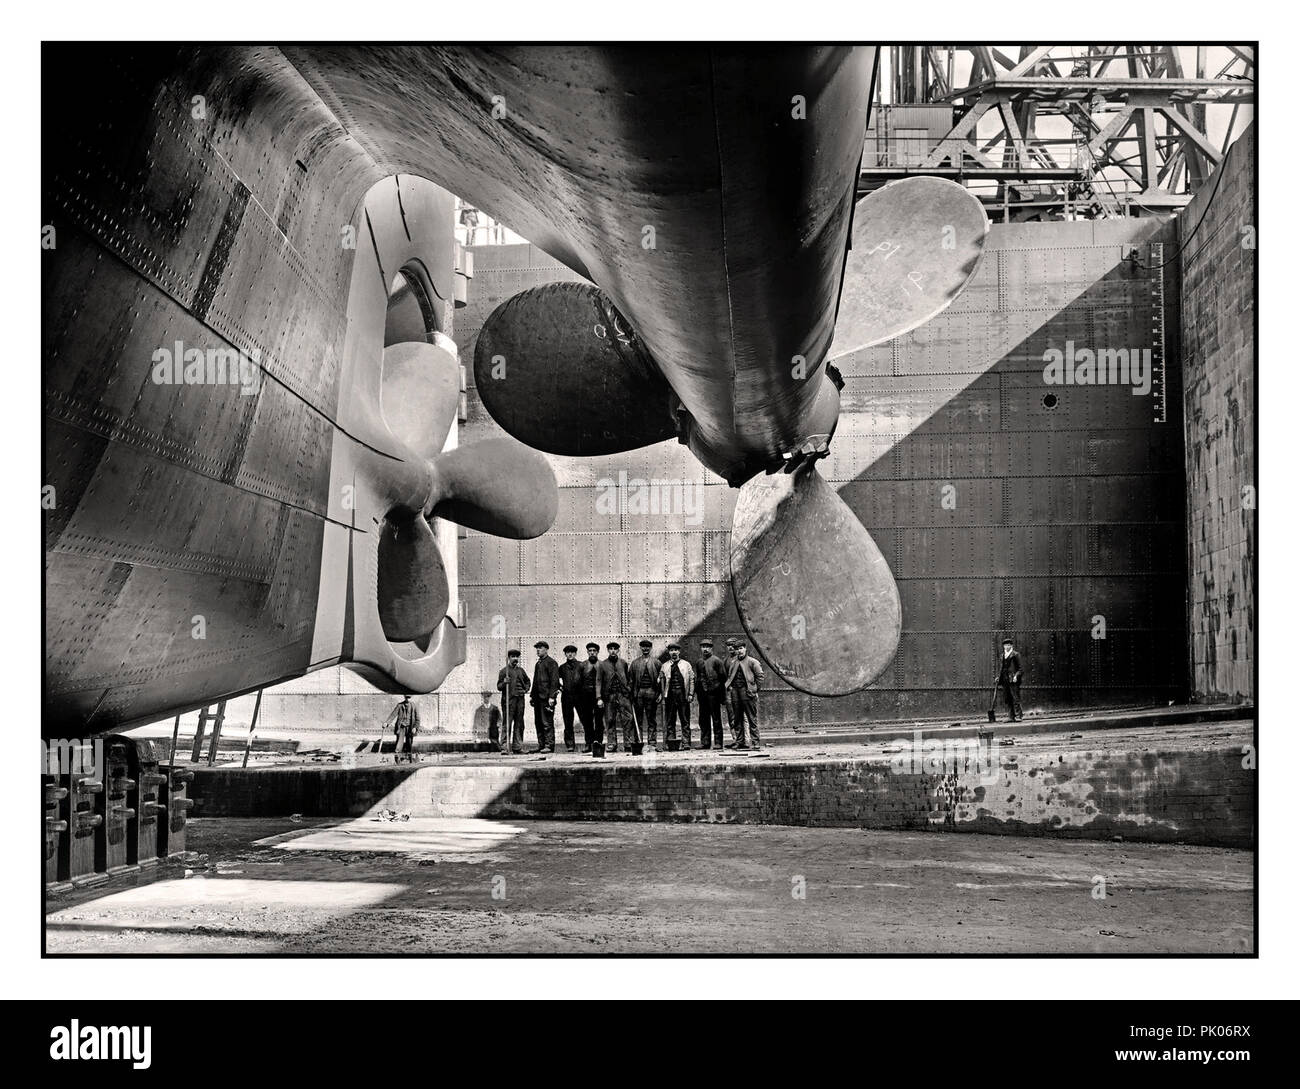 TITANIC/OLYMPIC PROPELLOR  Historic ship build 1912 image of RMS Titanic rudder and propellors with group of ship workers in the huge dry dock construction site adding scale to the huge Ocean Liner. Harland and Wolff shipyard Belfast UK Stock Photo